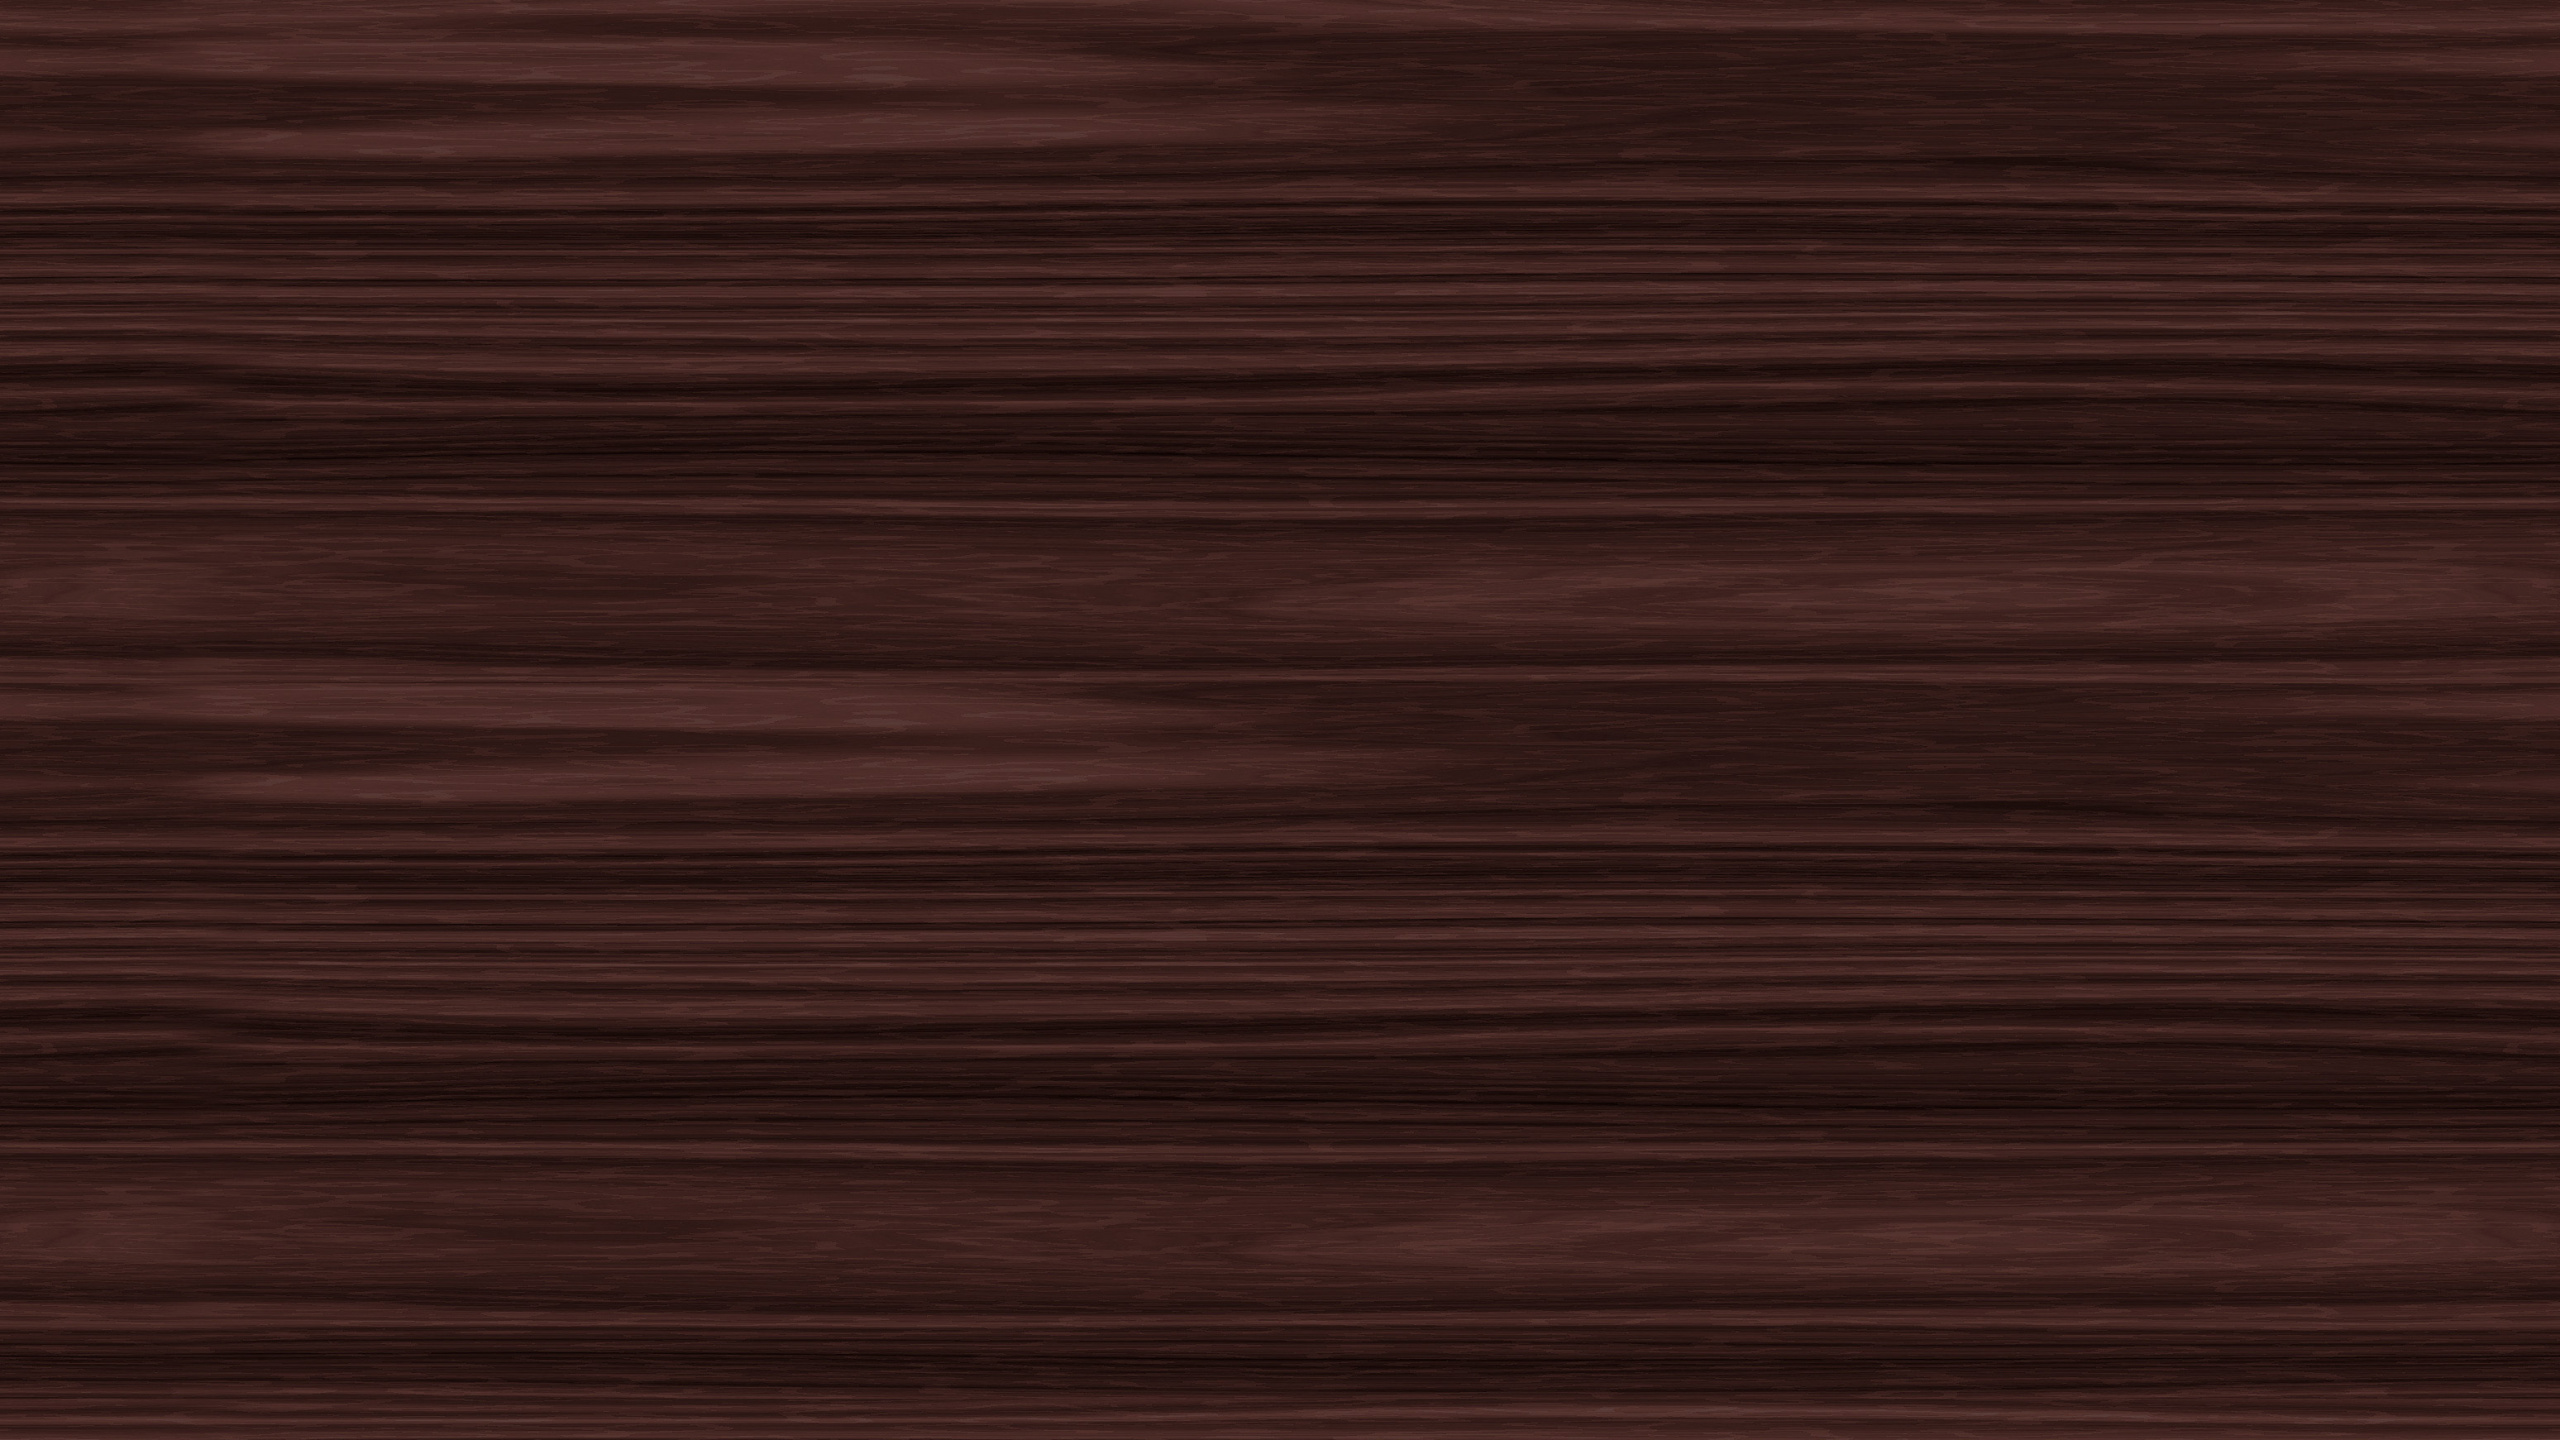 Red and Black Striped Textile. Wallpaper in 2560x1440 Resolution